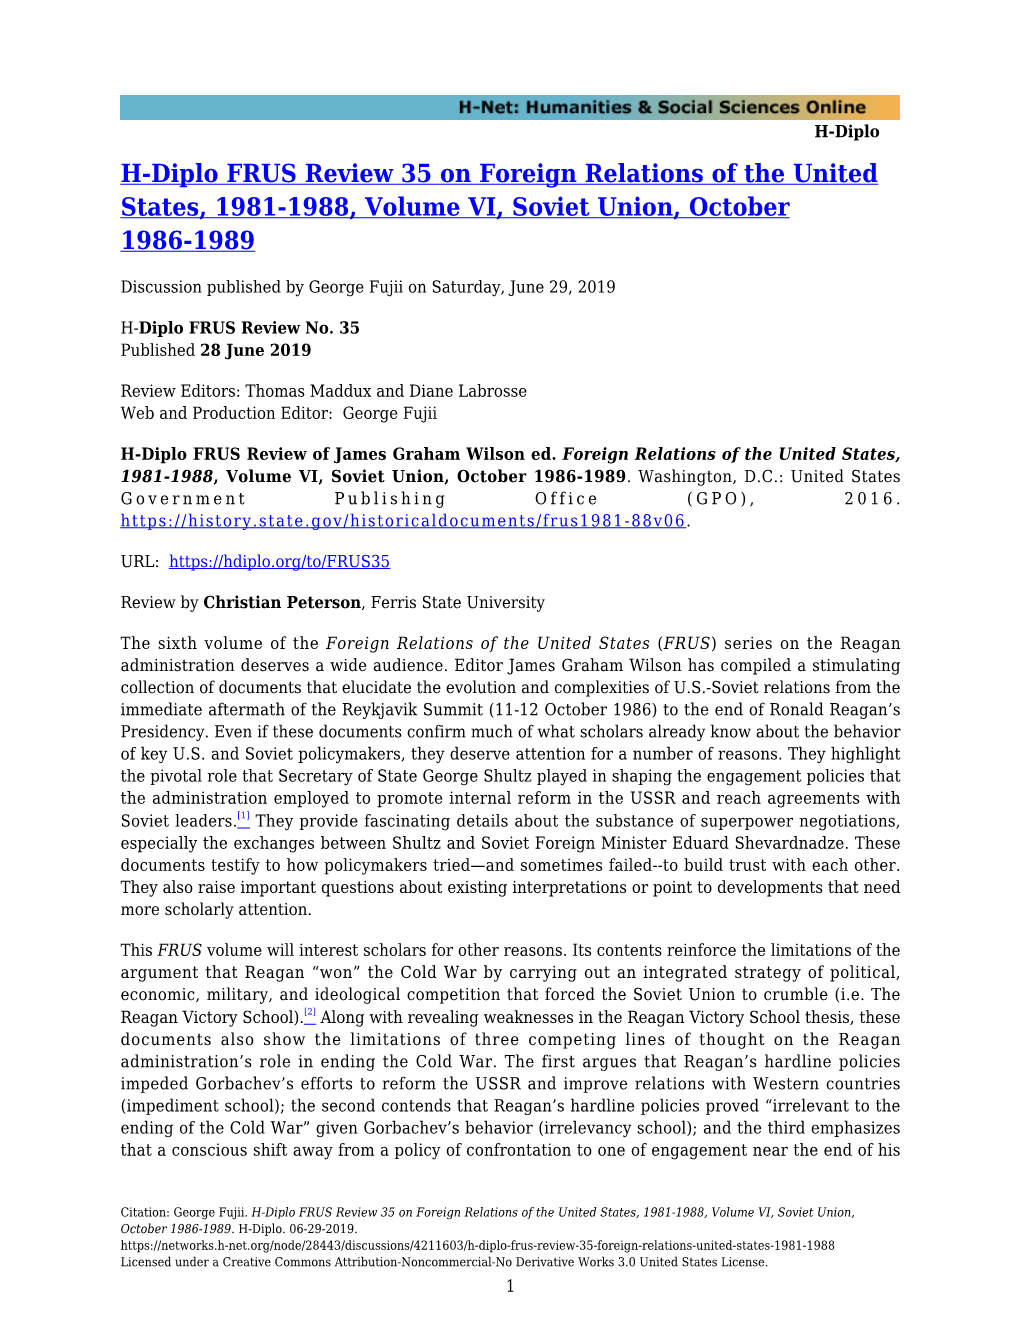 H-Diplo FRUS Review 35 on Foreign Relations of the United States, 1981-1988, Volume VI, Soviet Union, October 1986-1989